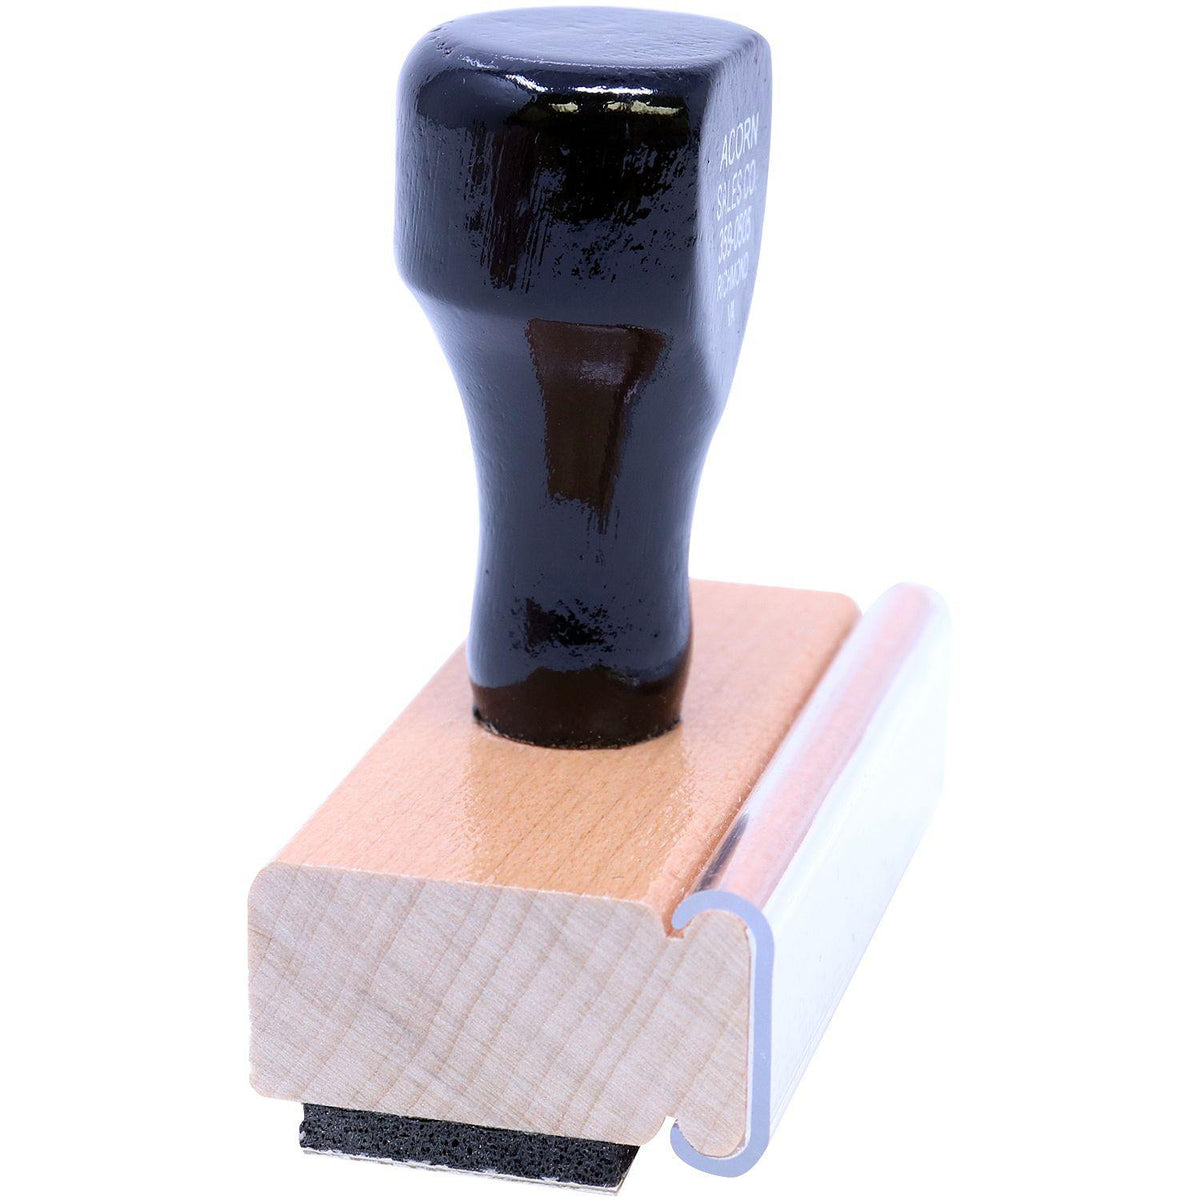 Side View of Large Pagado with Box Rubber Stamp at an Angle